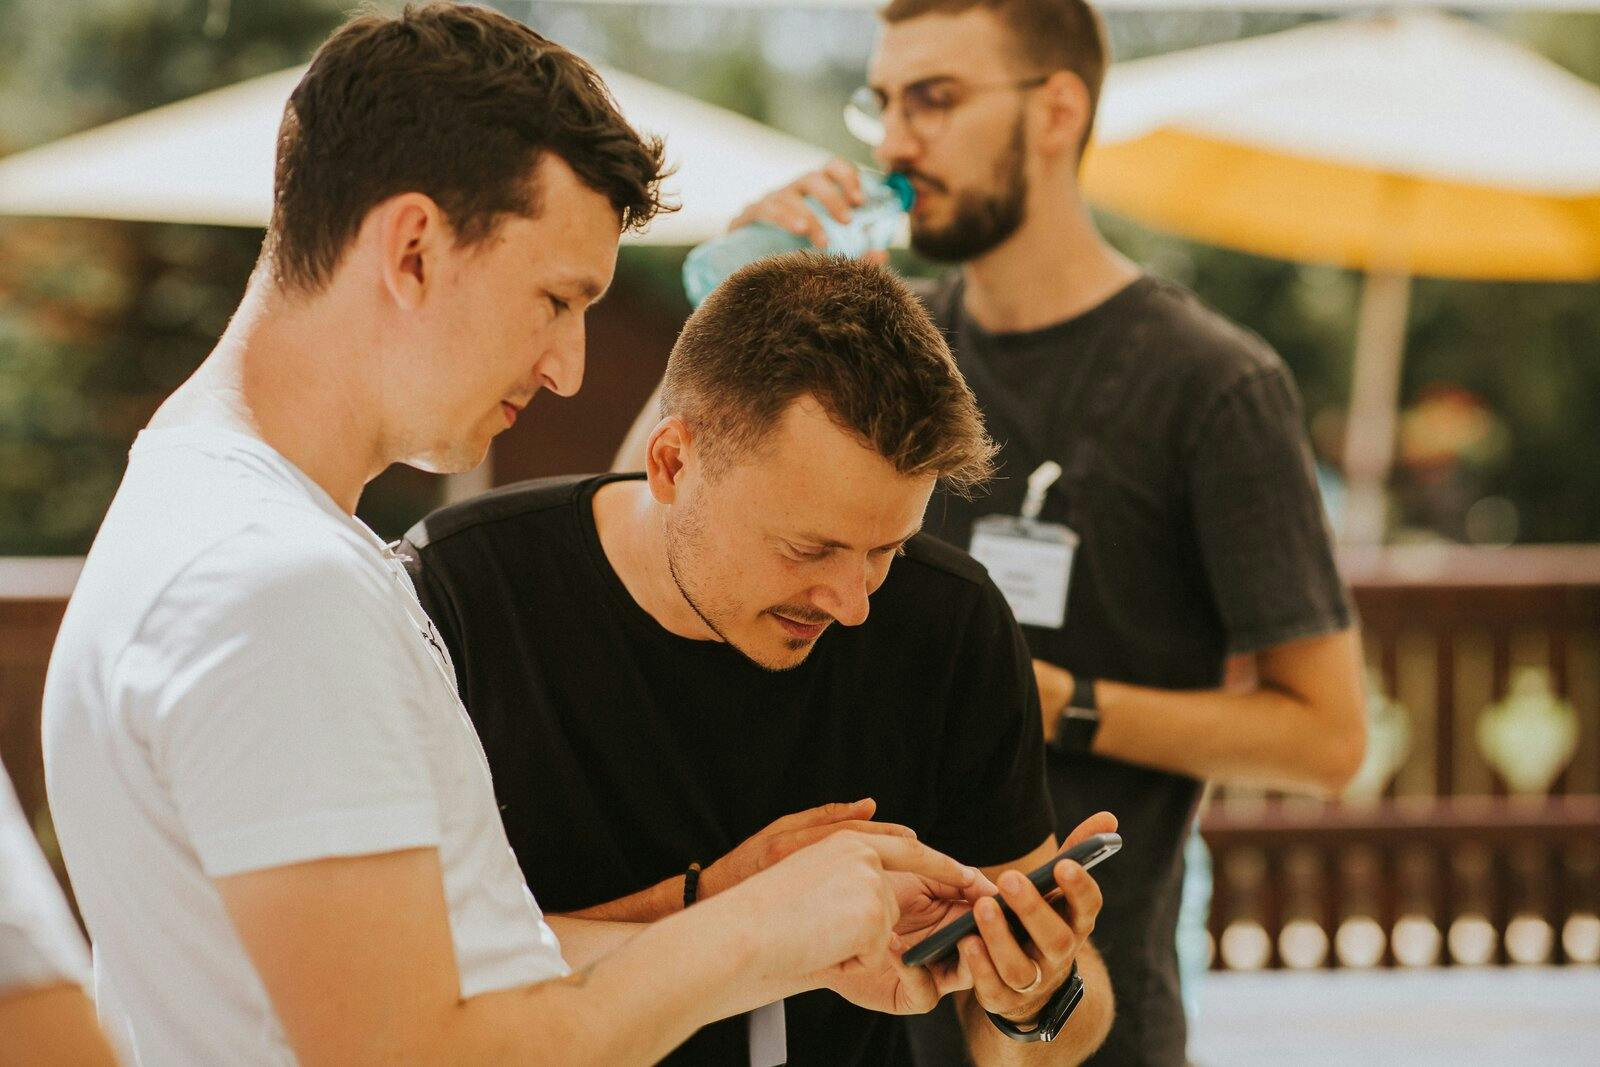 People inspecting an app on a mobile device